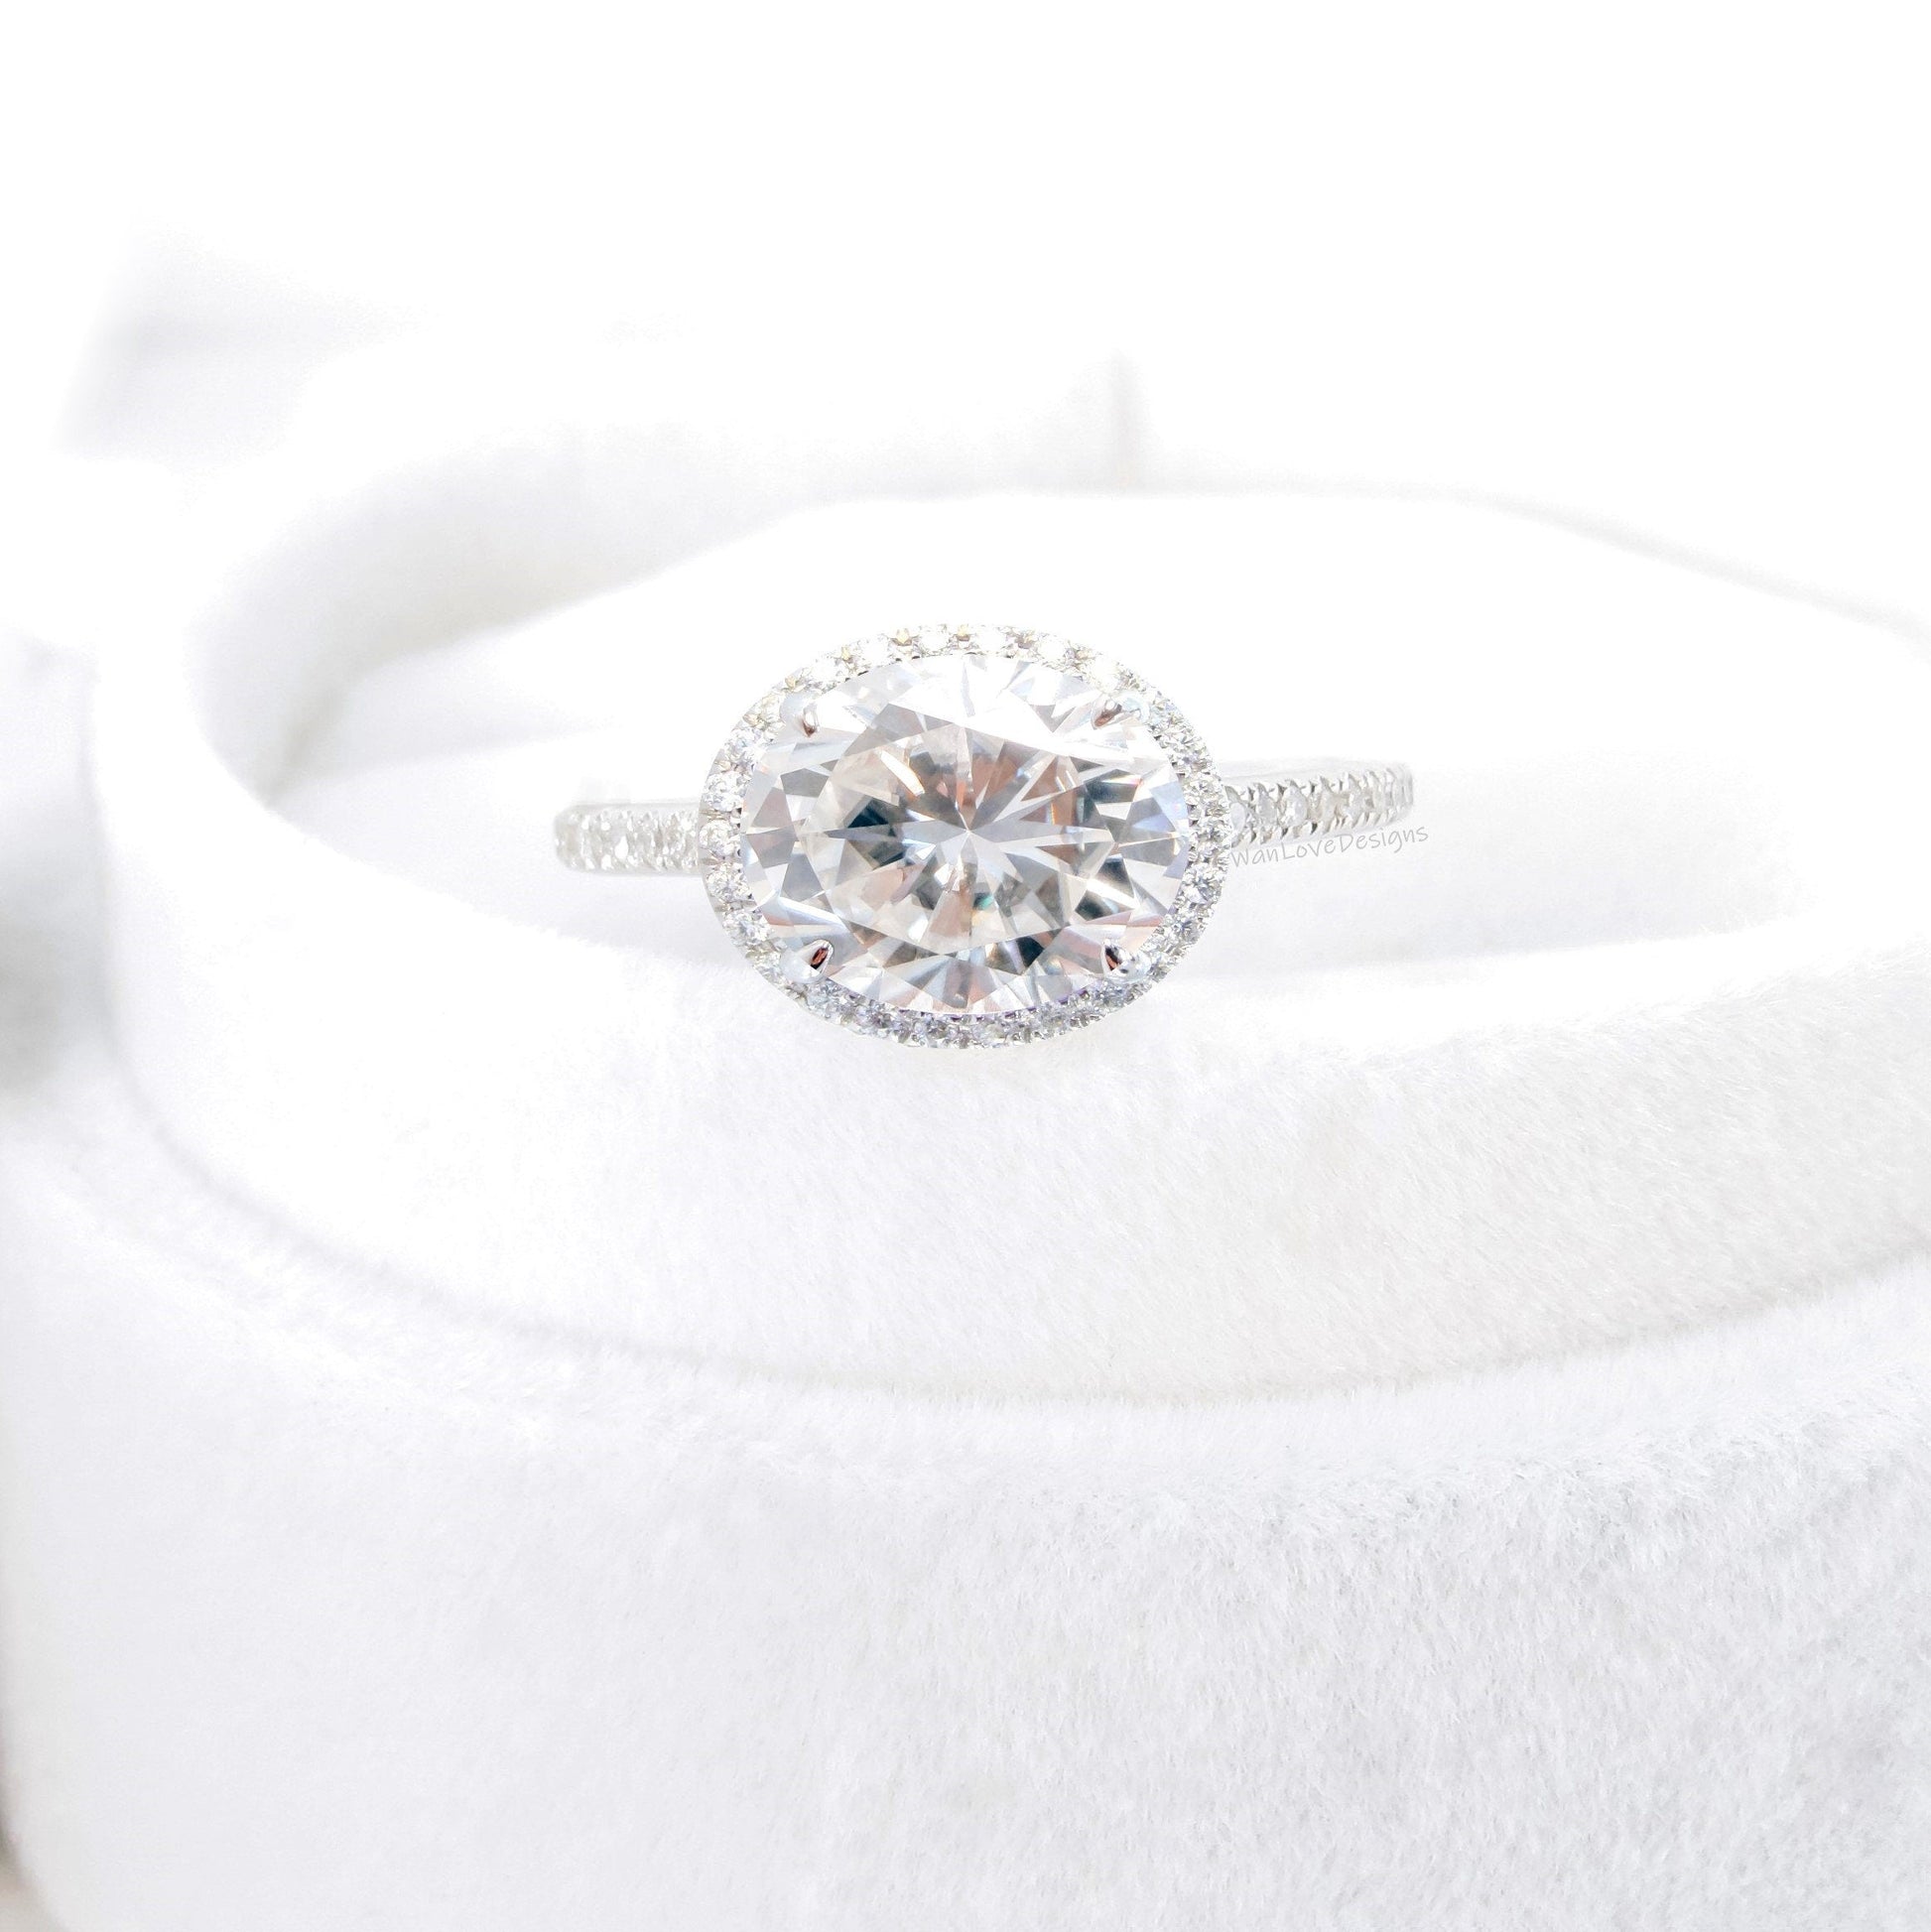 East West Moissanite Oval halo engagement ring white gold Unique halo engagement ring art deco Oval Diamond halo wedding Bridal promise ring Wan Love Designs